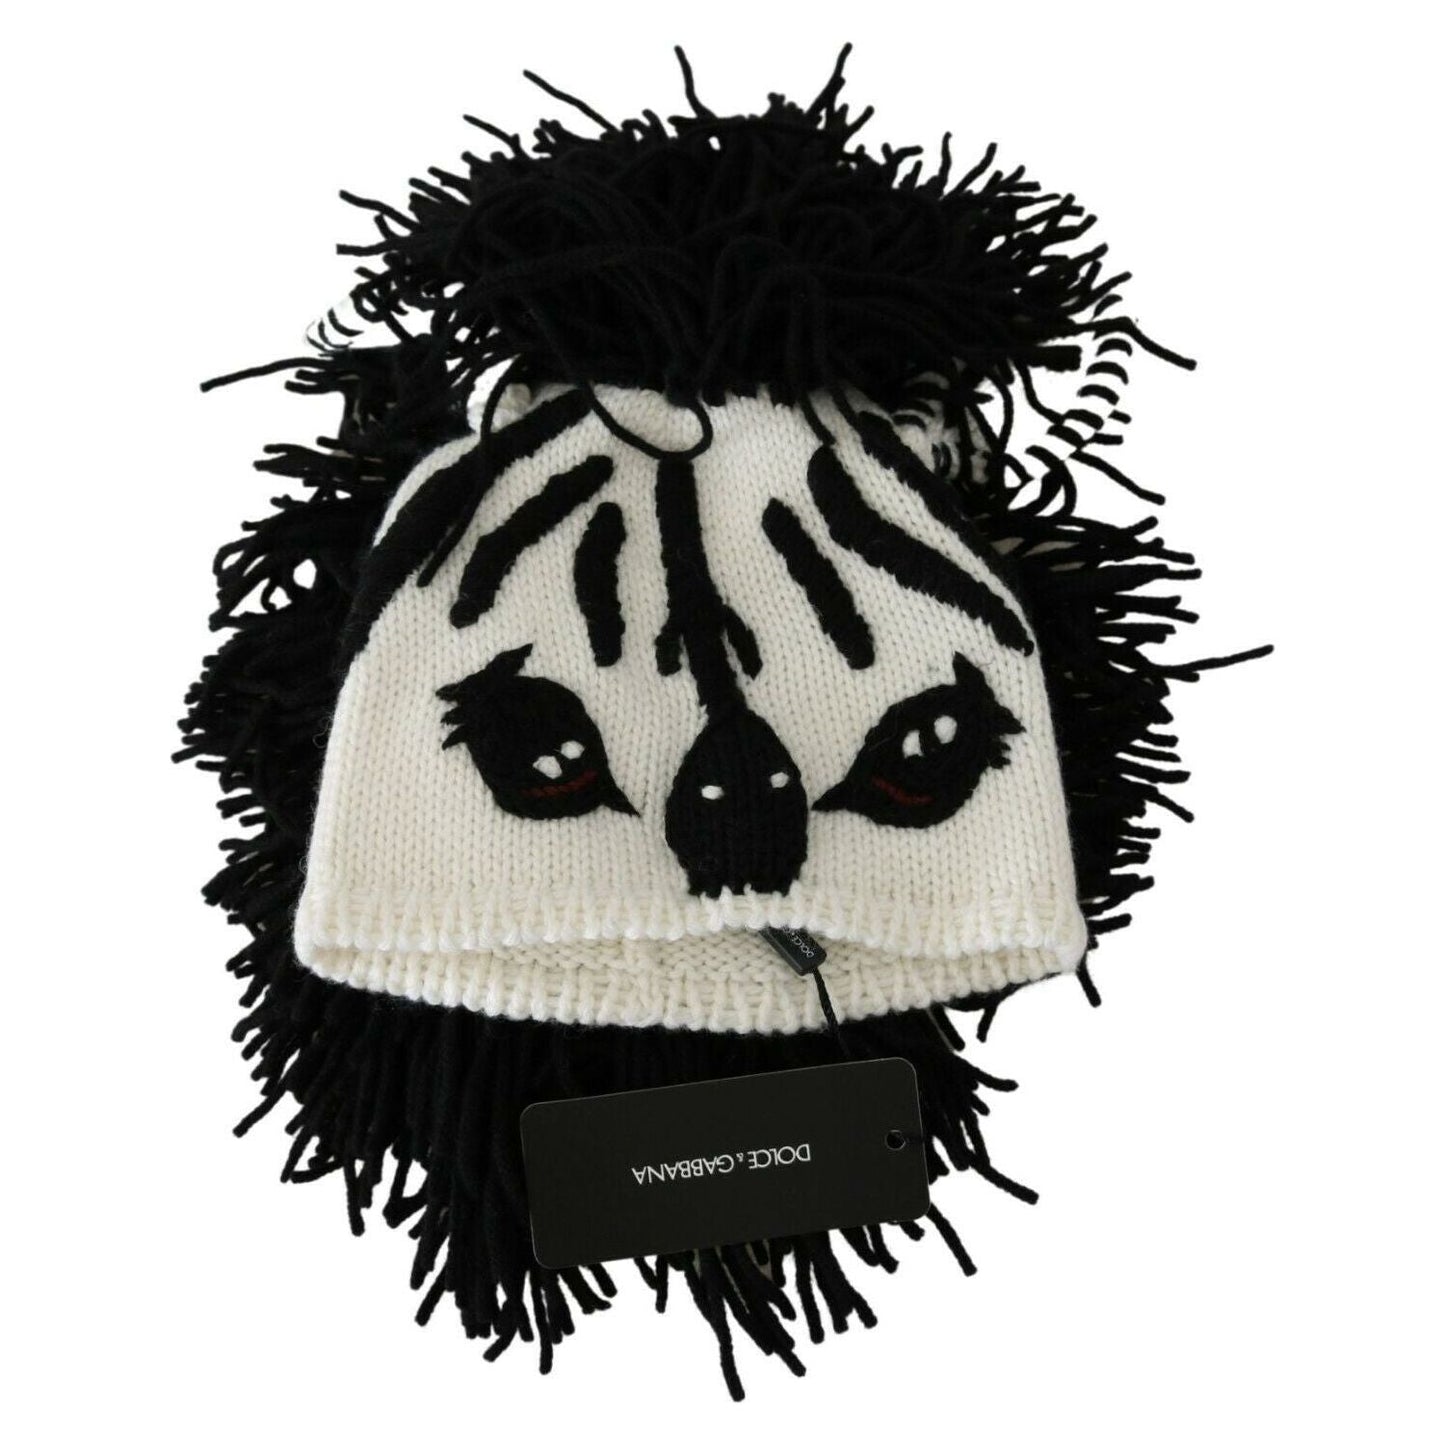 Dolce & Gabbana Black and White Knitted Cashmere Beanie WOMAN HATS black-white-knitted-cashmere-animal-design-hat s-l1600-43-d02e9ce9-55d.jpg